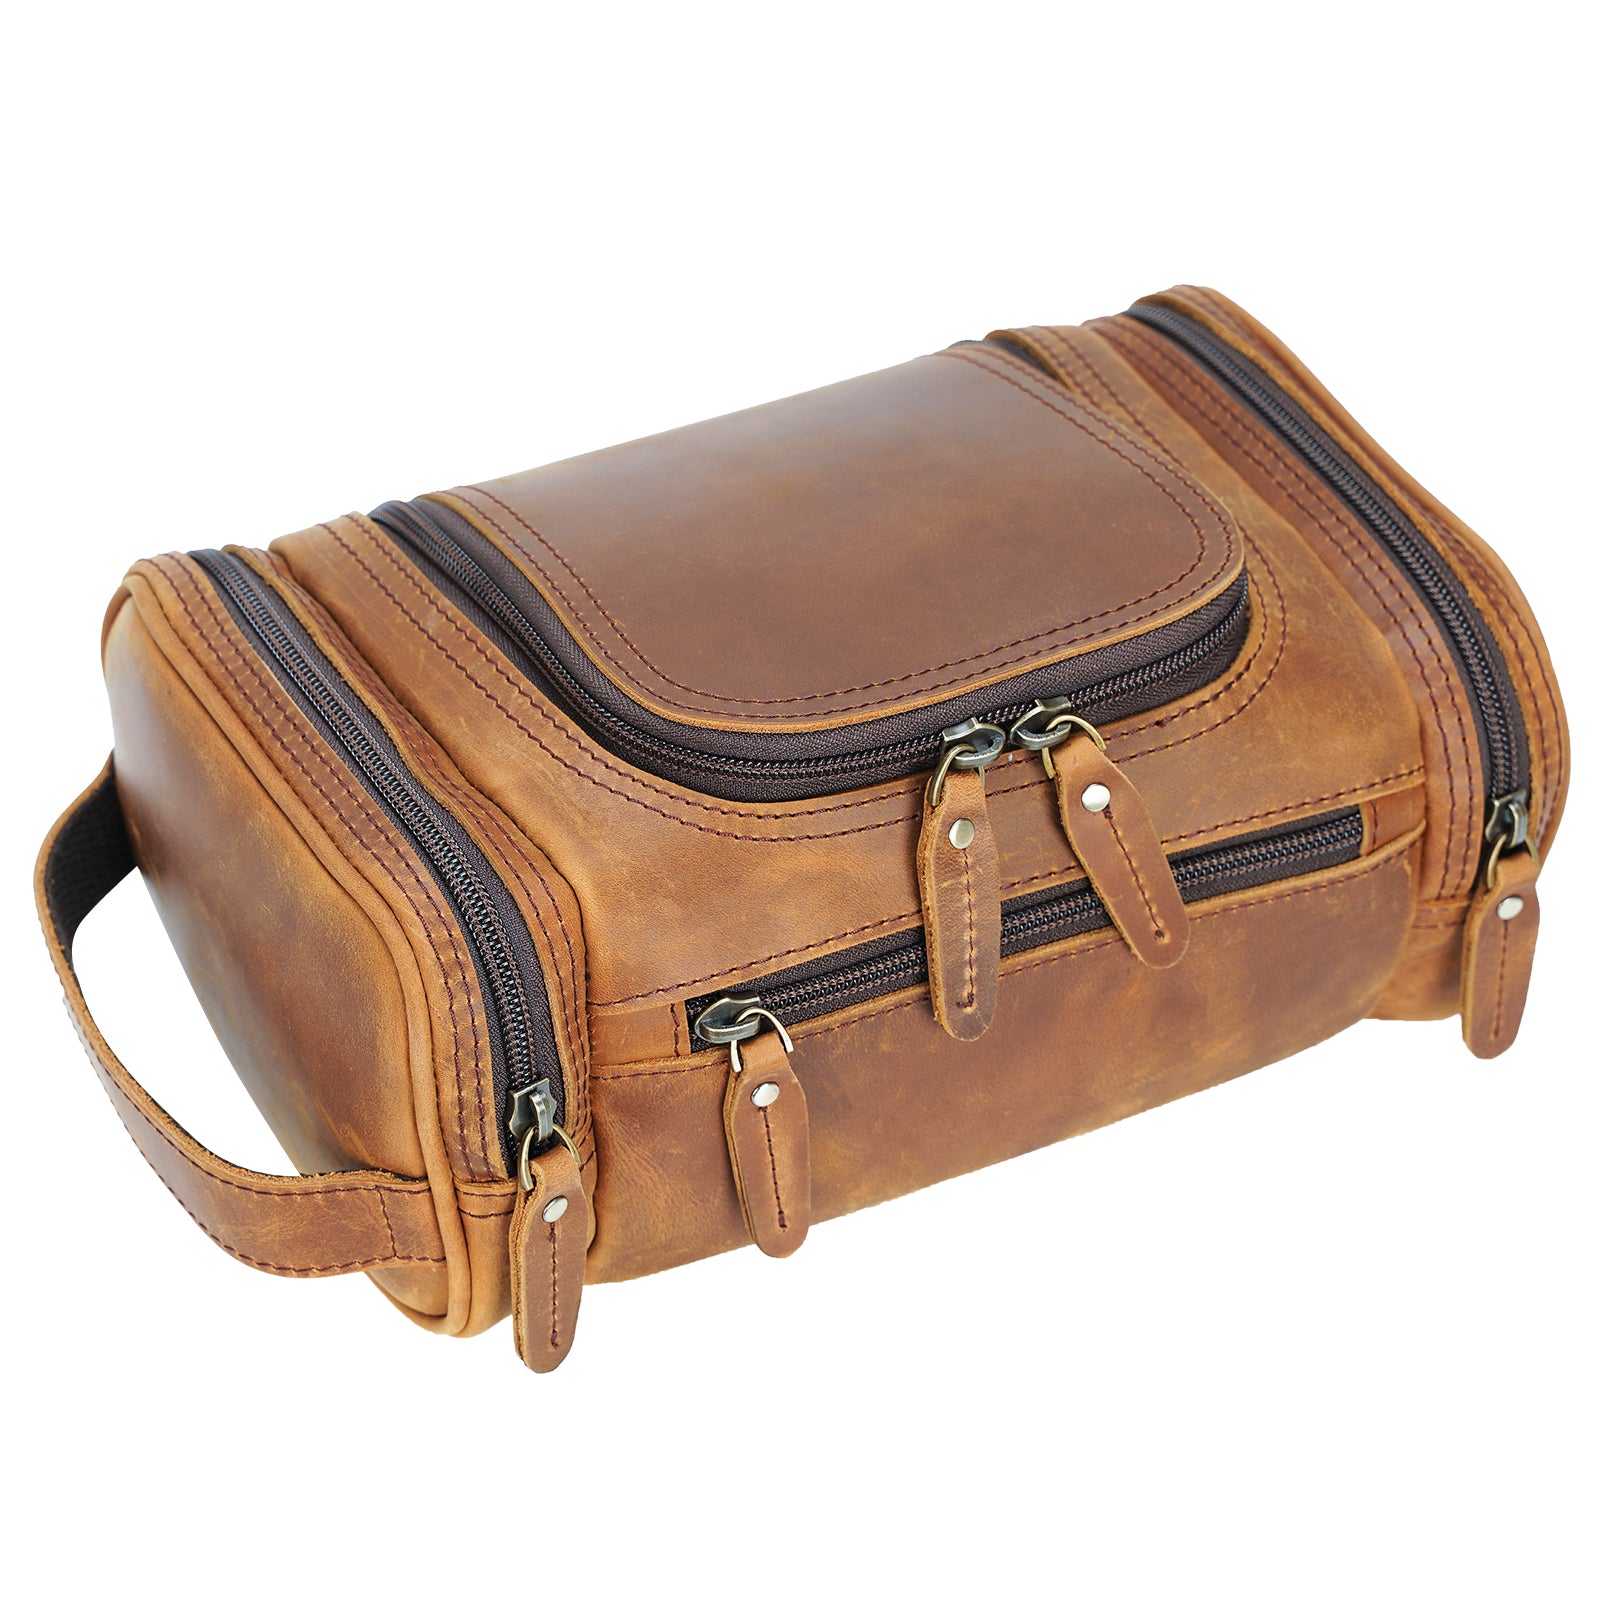 Polare Toiletry Bag Full Grain Leather Travel Case Wash Bag (Brown)